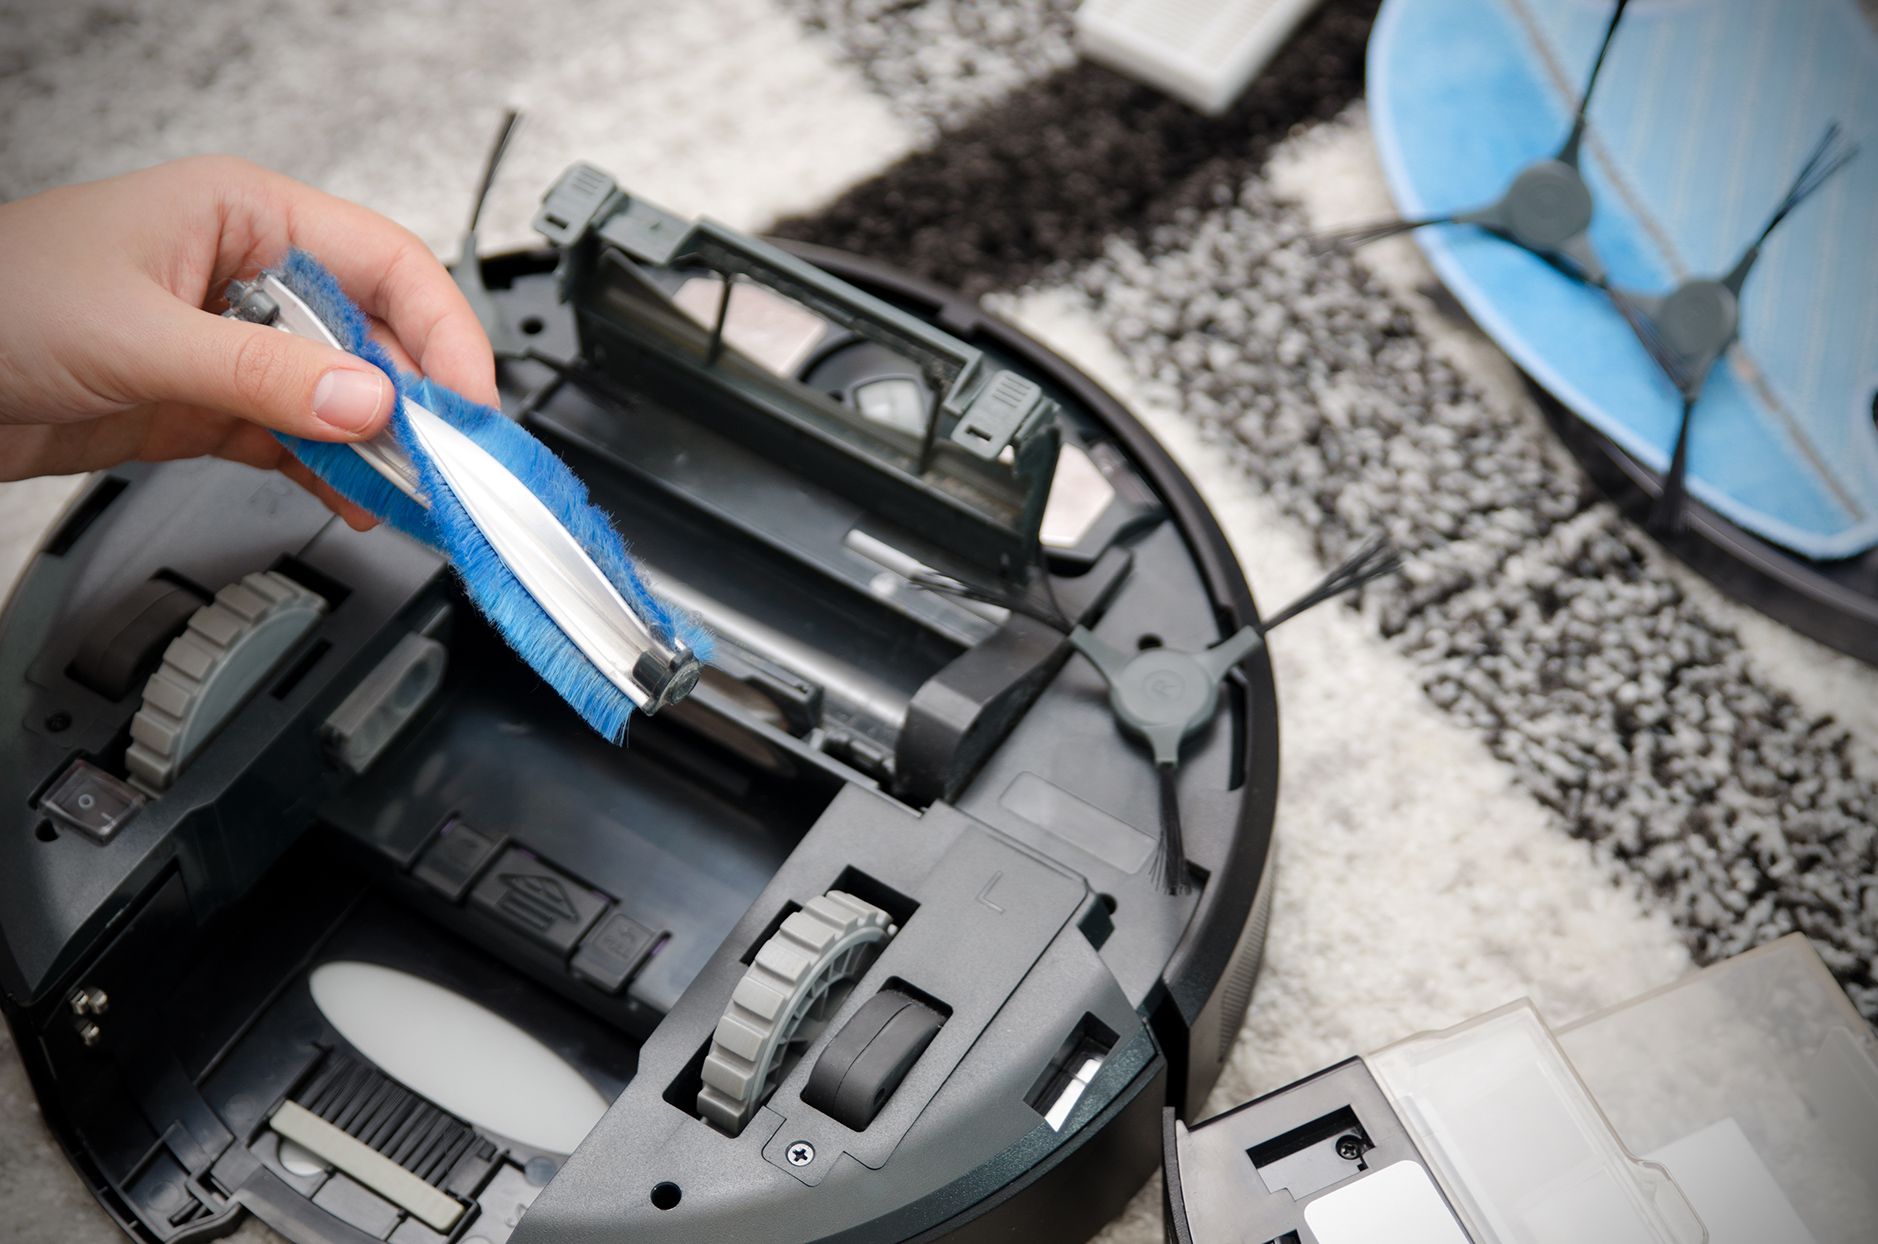 How To Clean Roomba Brush